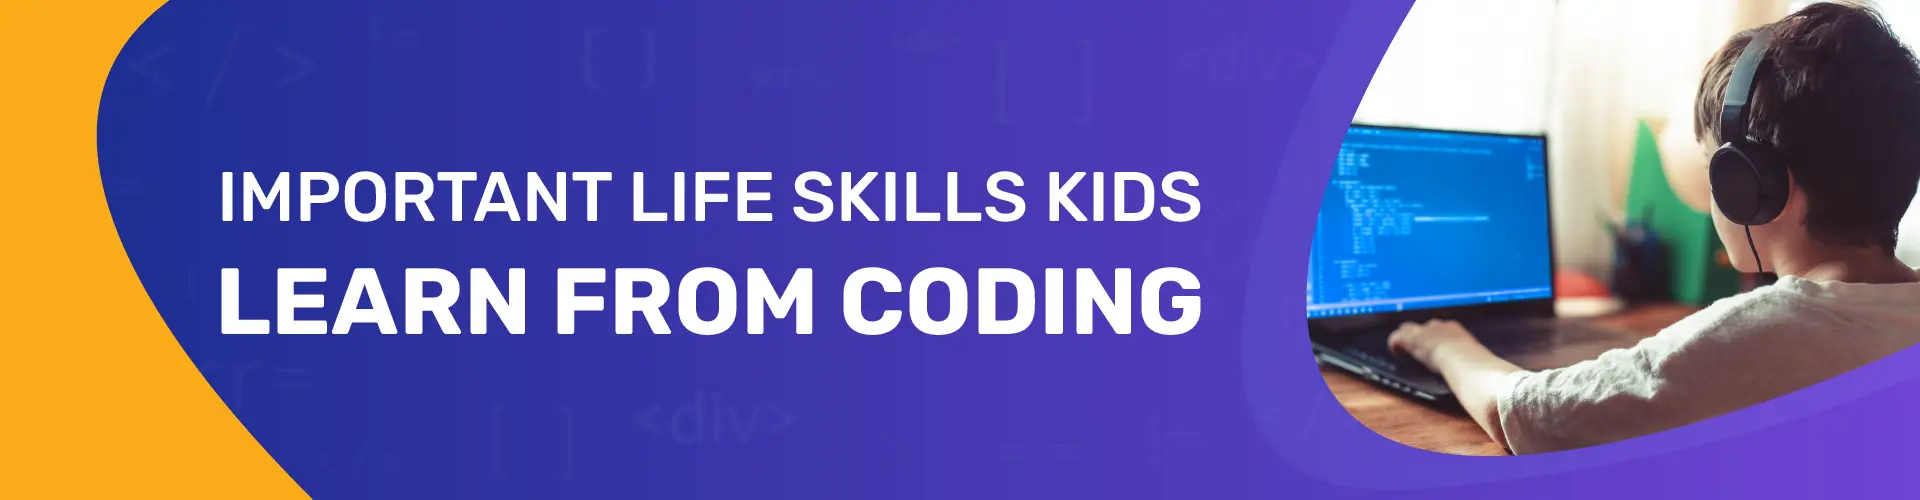 Important Life Skills Kids Learn from Coding